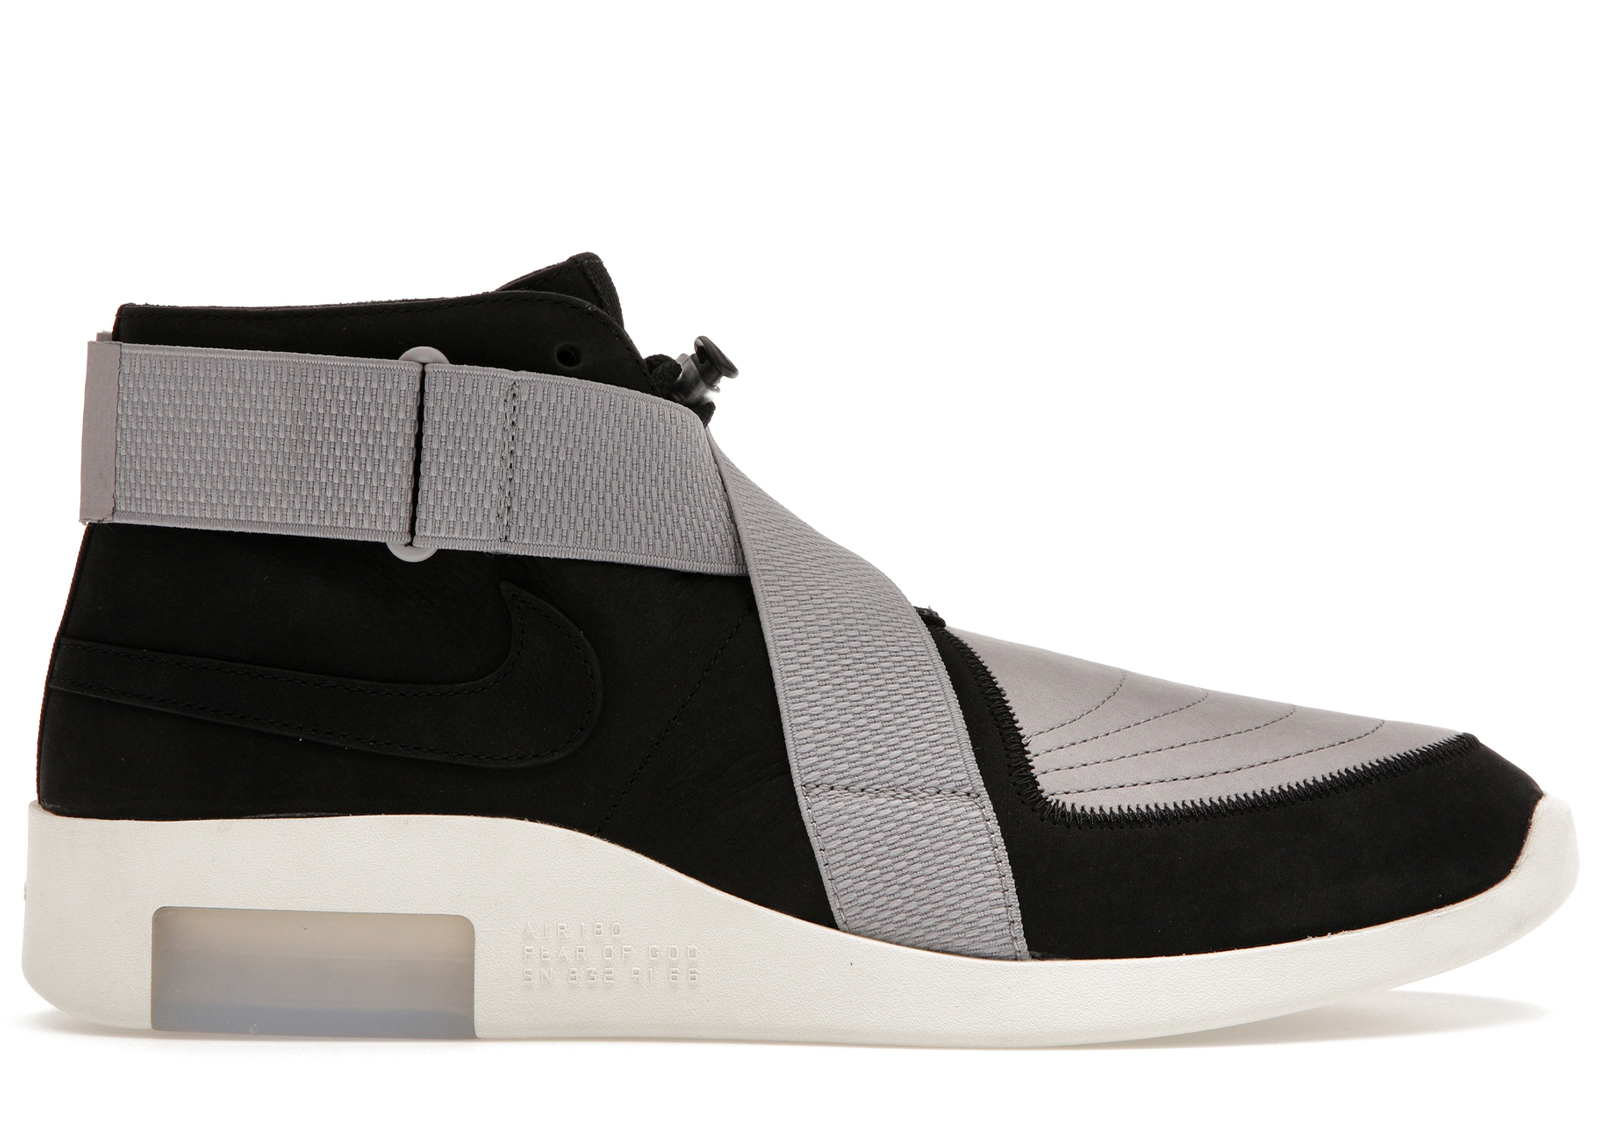 Buy Nike Fear Of God Size 9.5 Shoes & New Sneakers - StockX